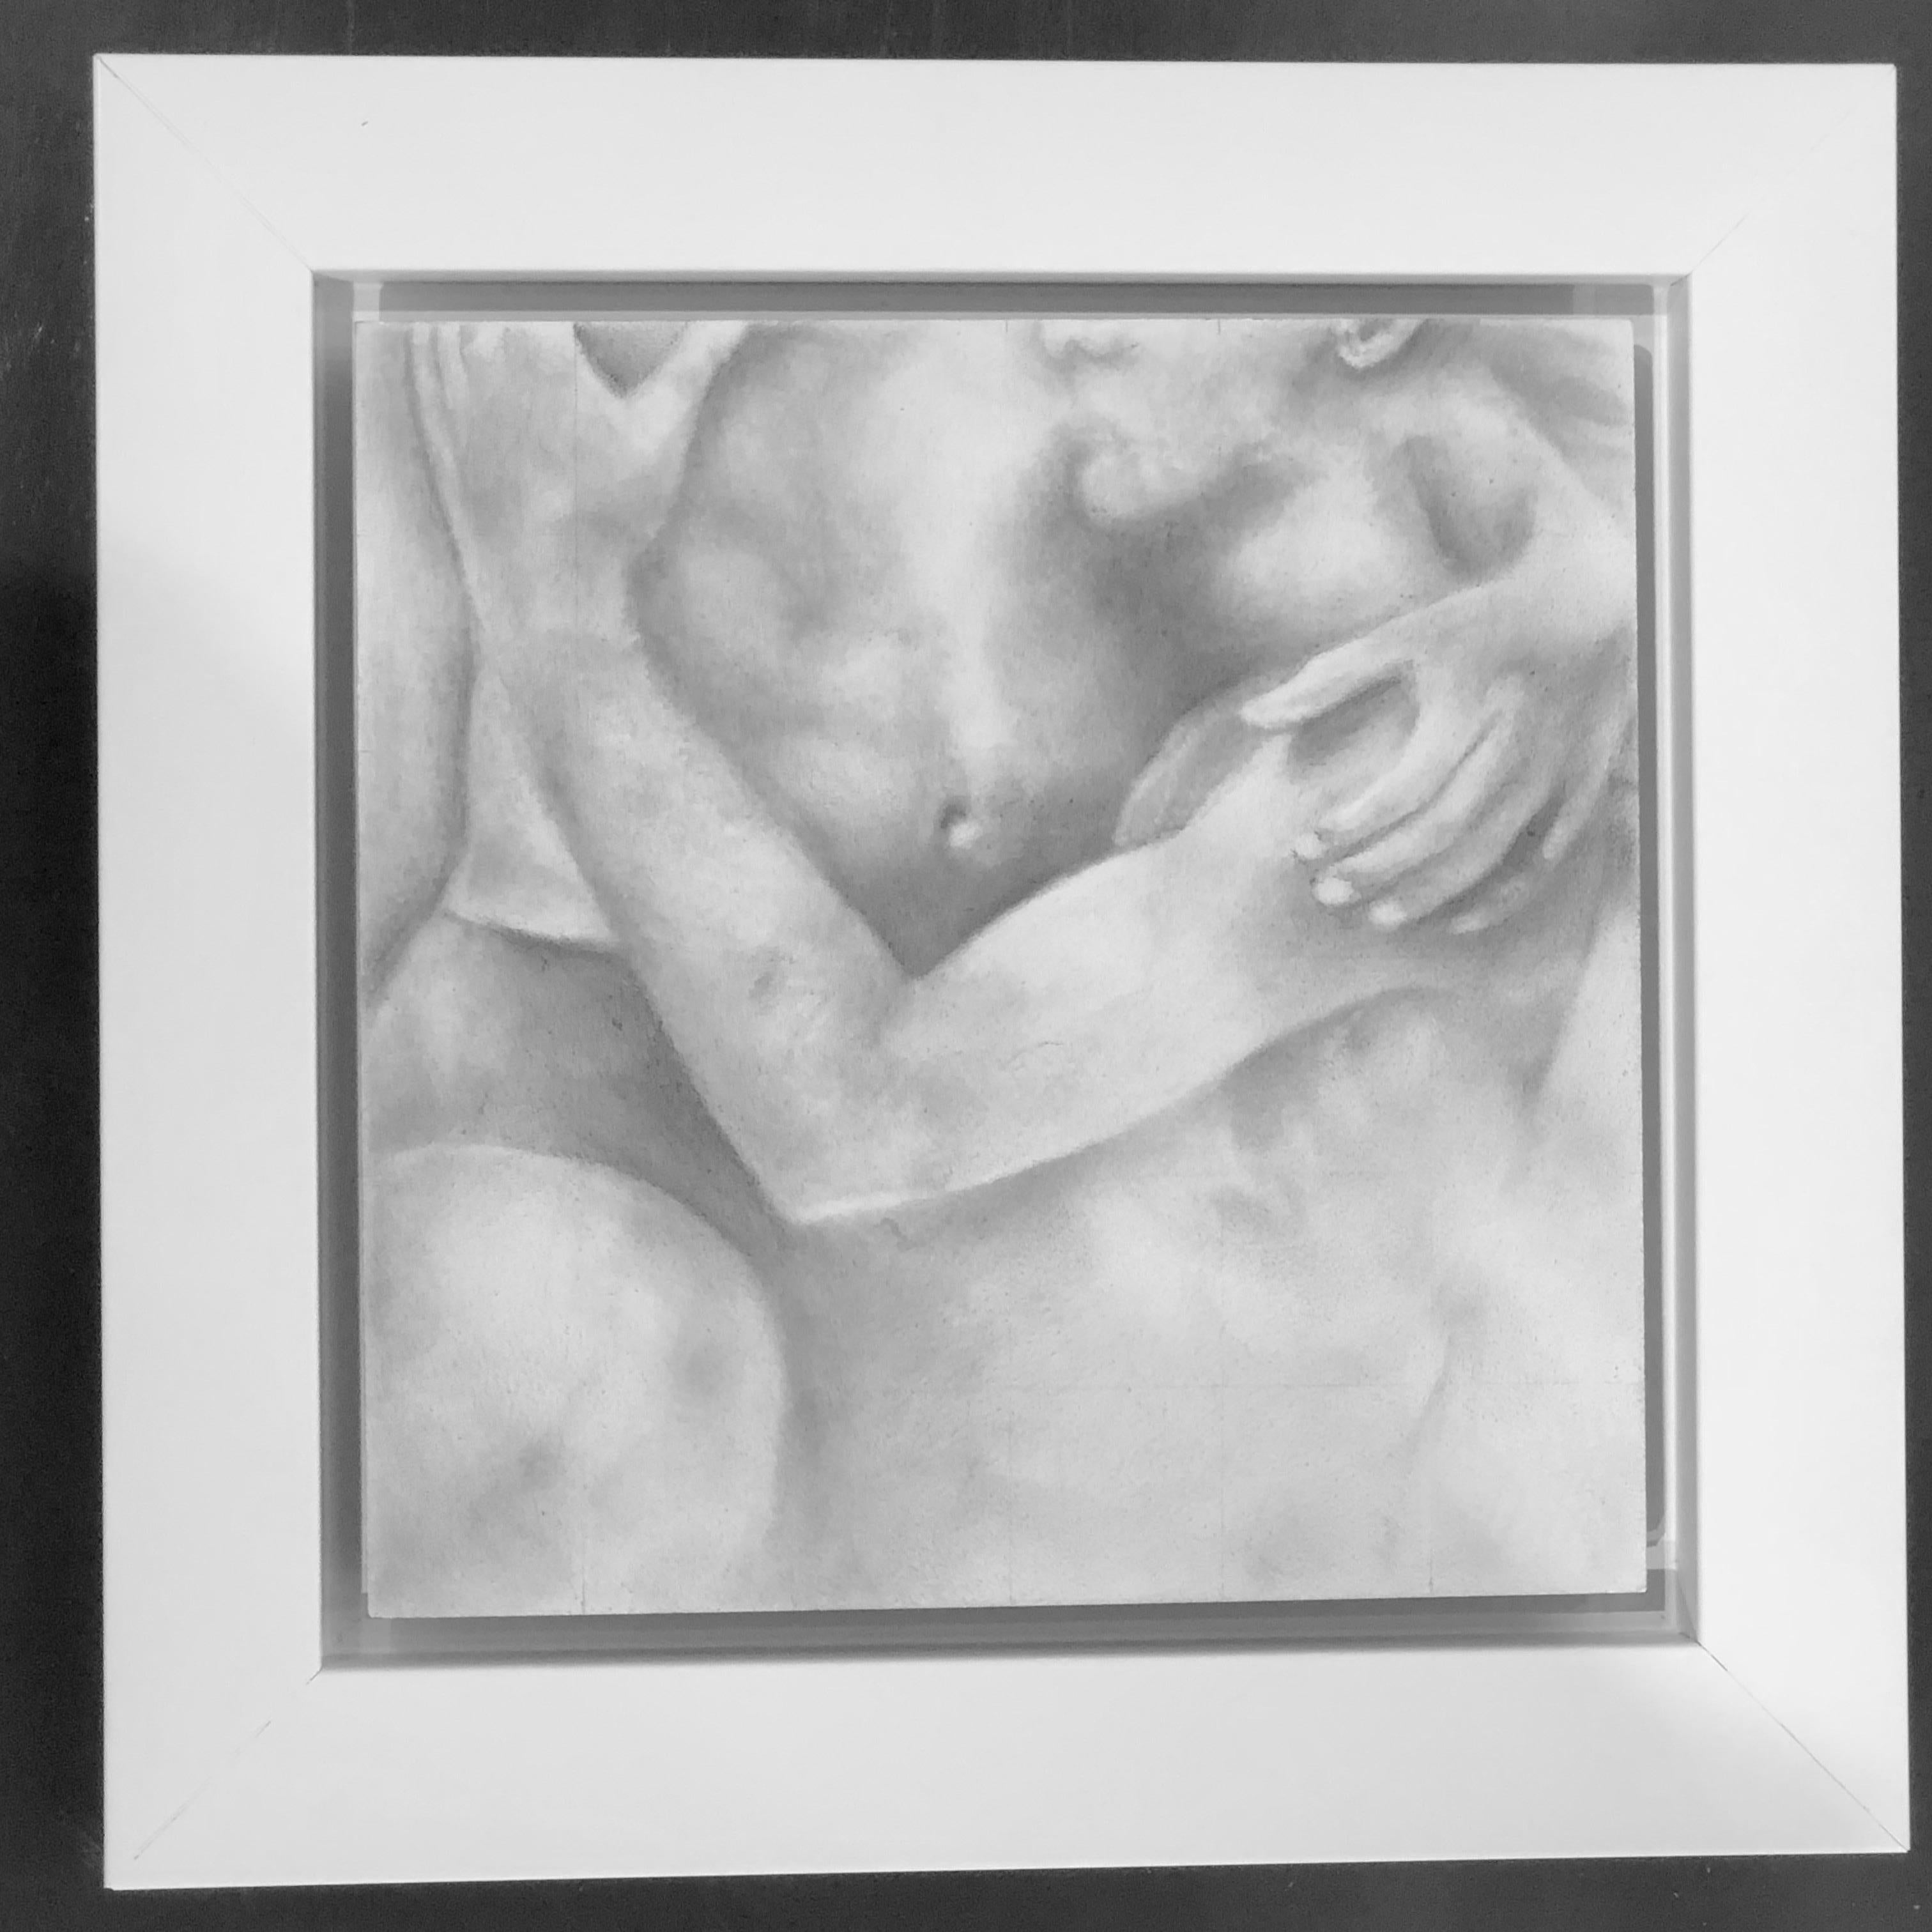 Proximity - Embracing Nude Figures, Original Graphite Drawing on Panel - Art by Rick Sindt